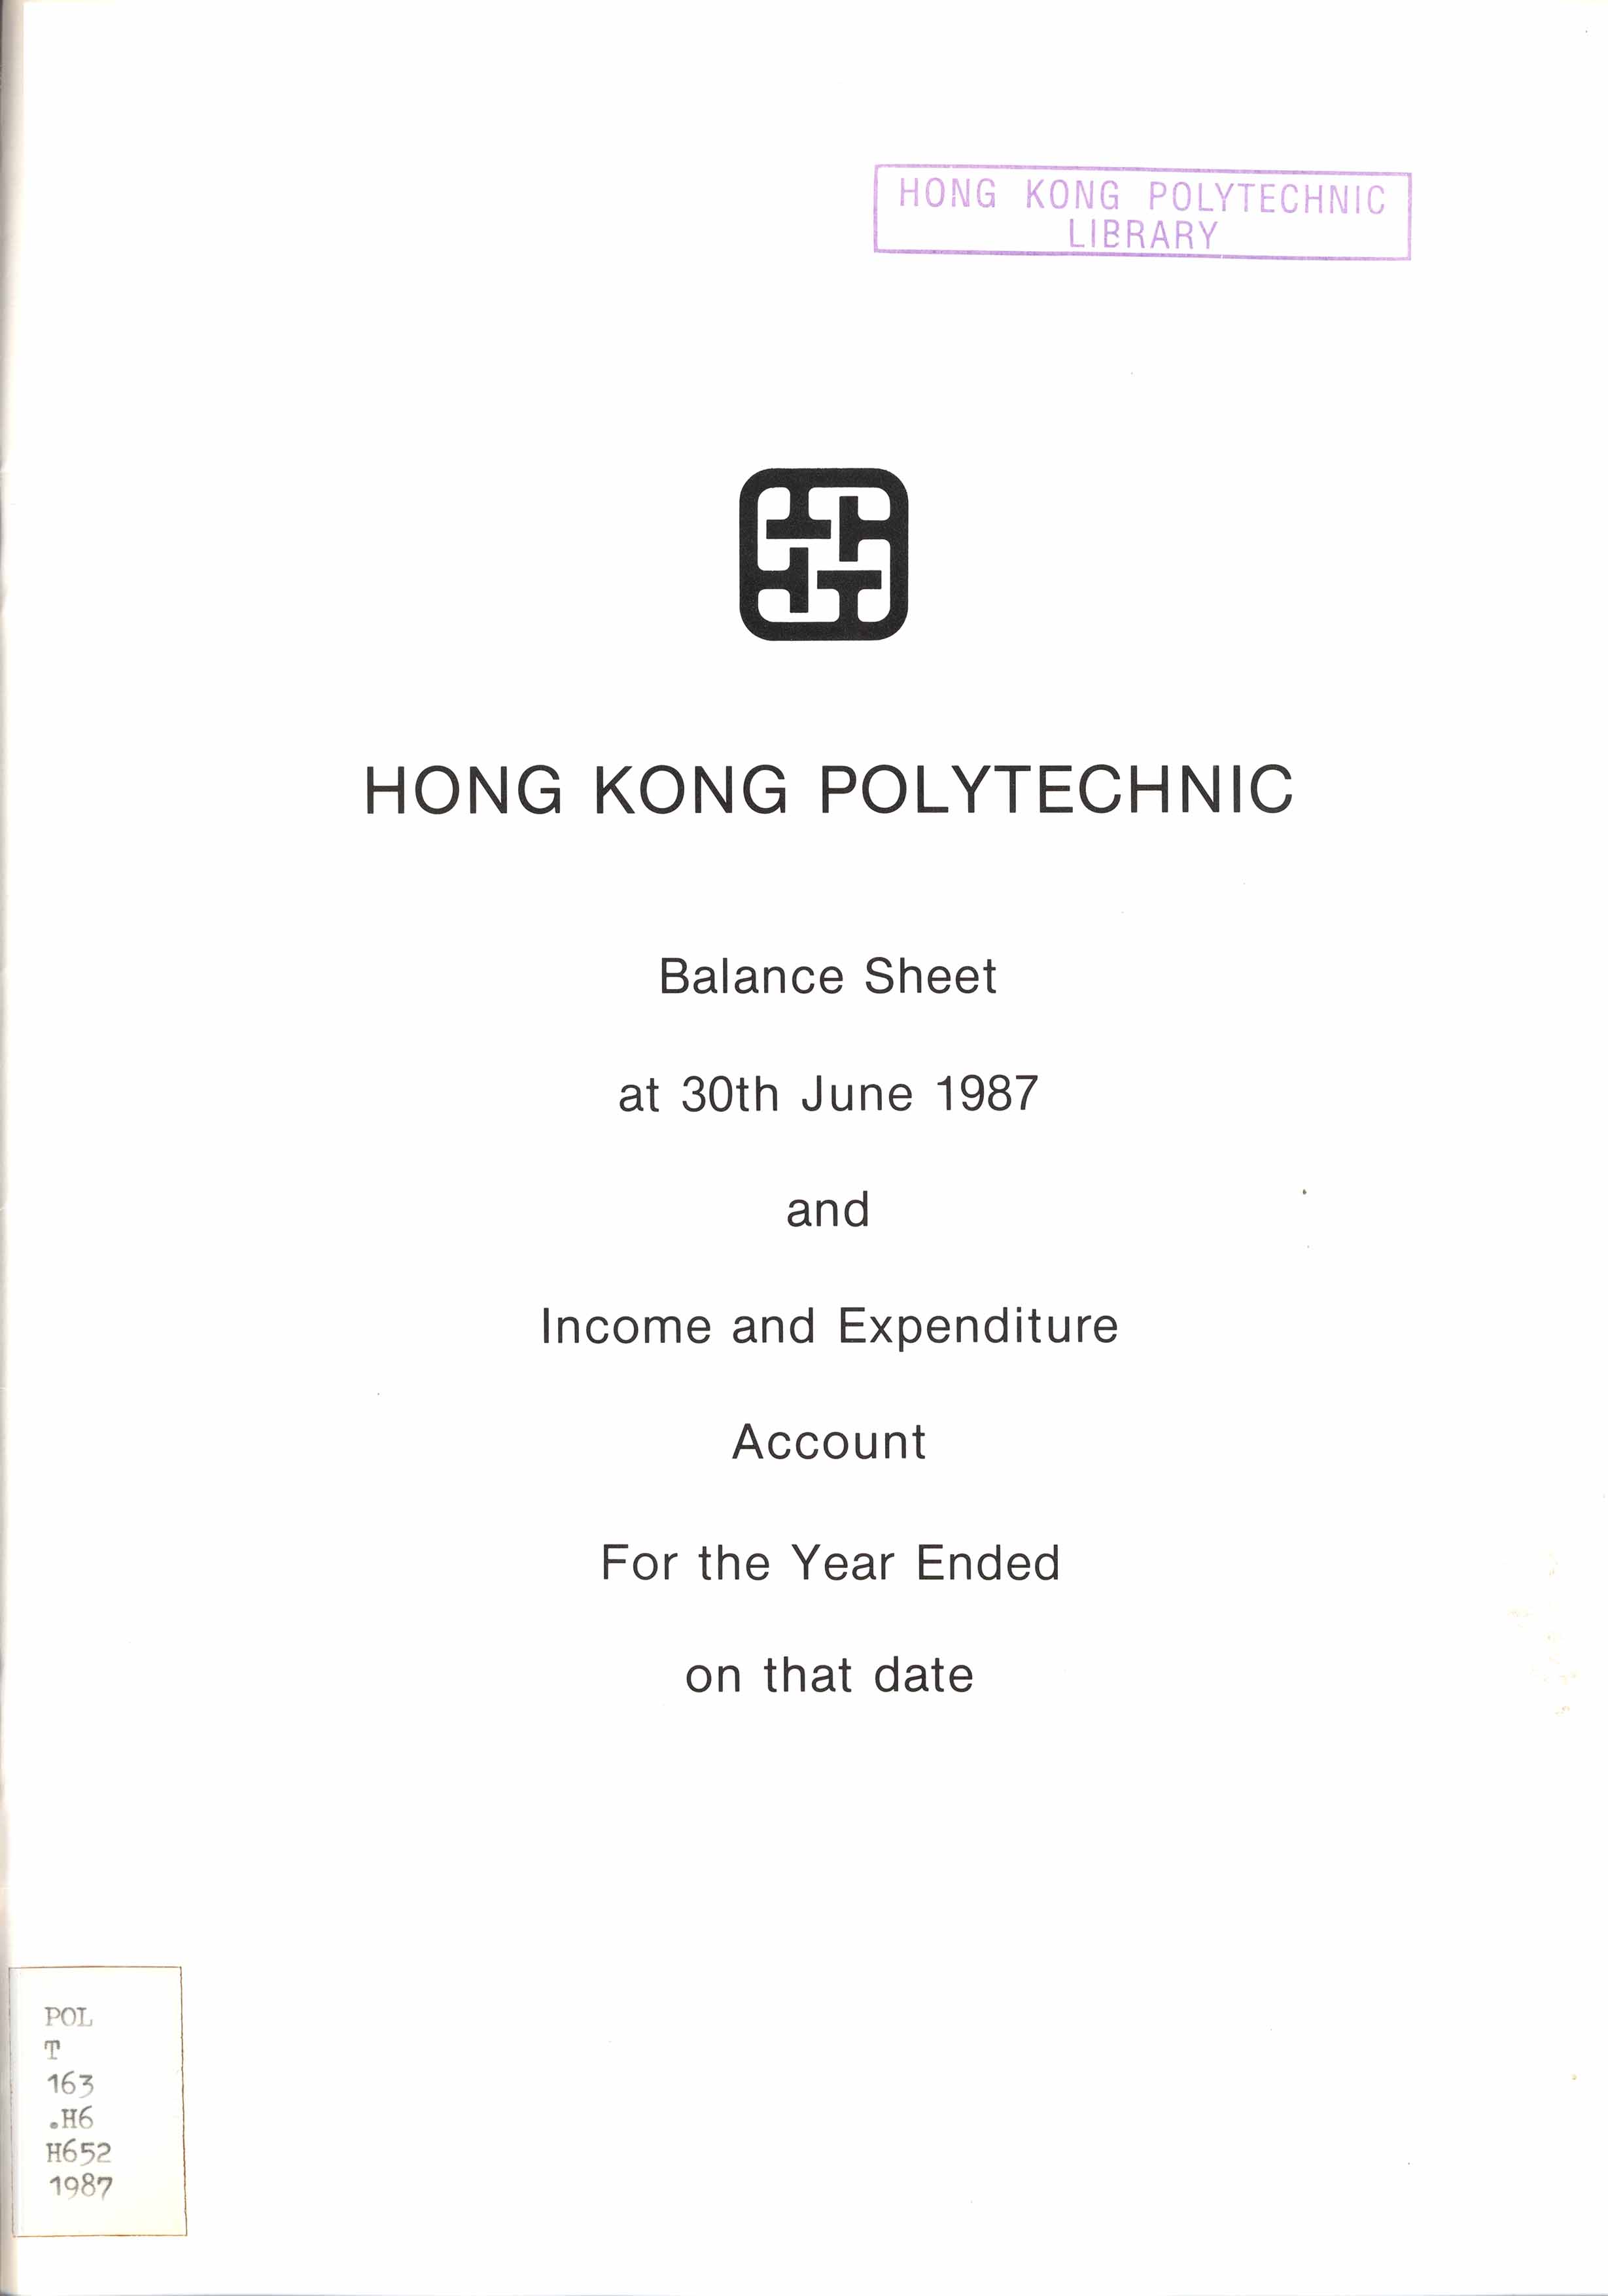 Balance sheet at 30th June 1987 and income and expenditure account for the year ended on that date